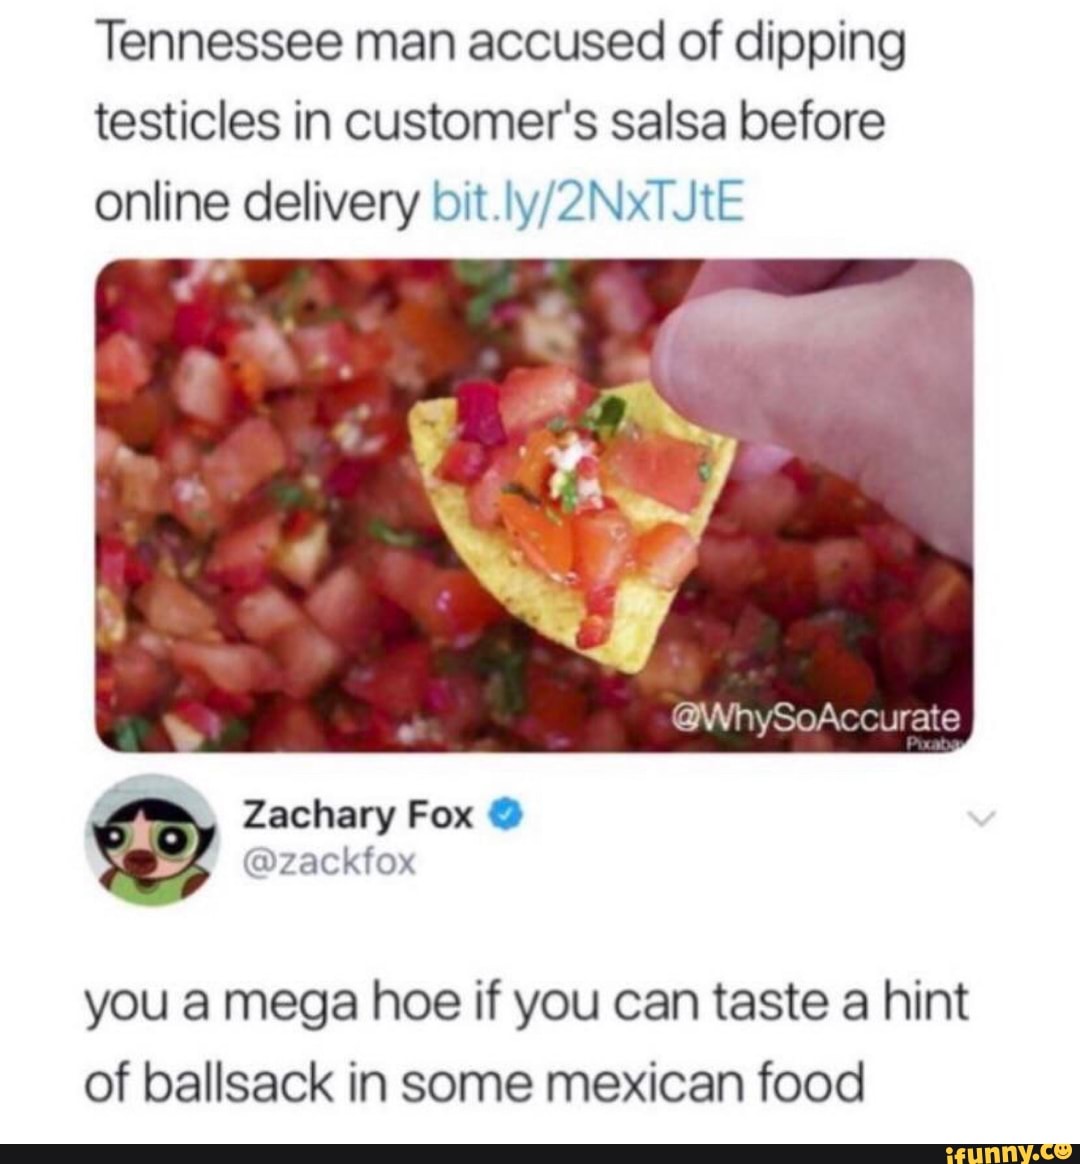 tennessee man accused of dipping testicles and salsa - Tennessee man accused of dipping testicles in customer's salsa before online delivery bit.ly2NXTJE Zachary Fox you a mega hoe if you can taste a hint of ballsack in some mexican food ifunny.co